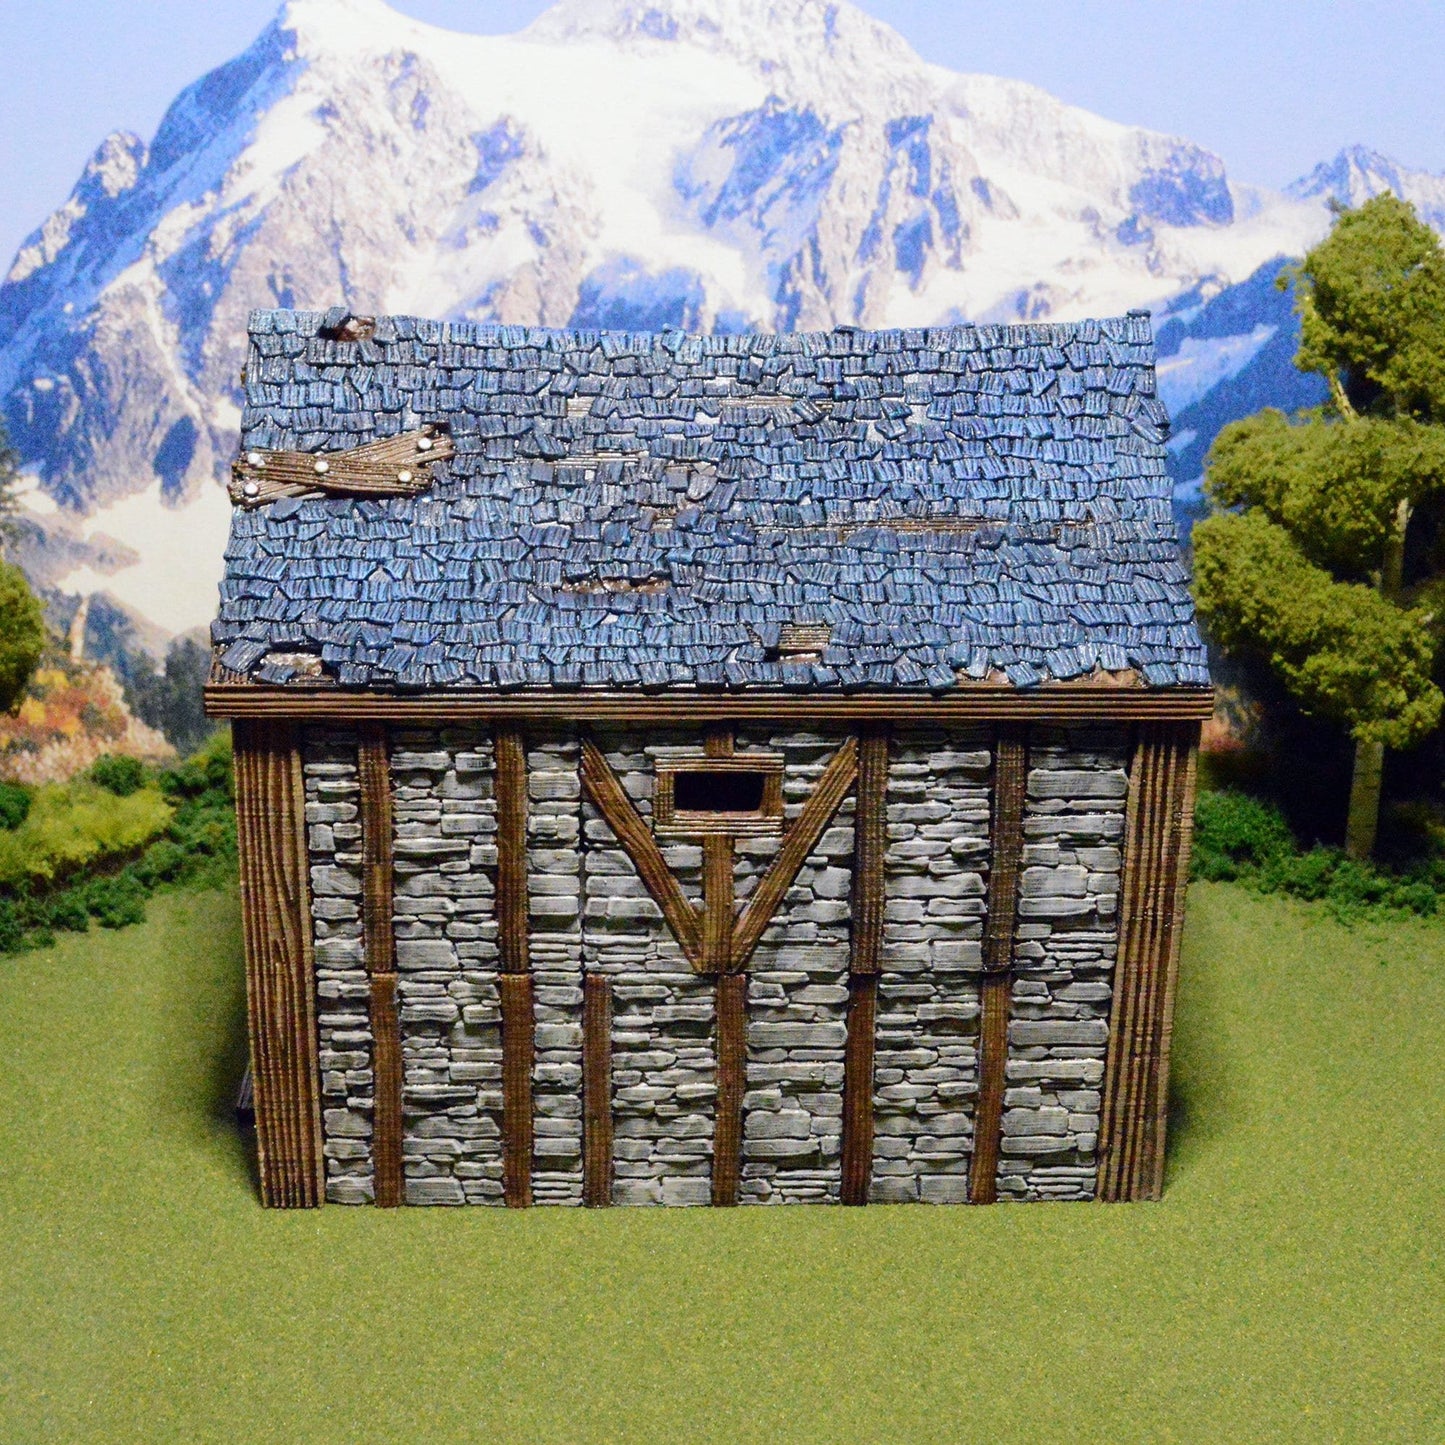 DnD Miniature Stone Barn 28mm, Modular OpenLOCK Building, D&D Pathfinder Medieval Terrain, Gift for Tabletop Gamers